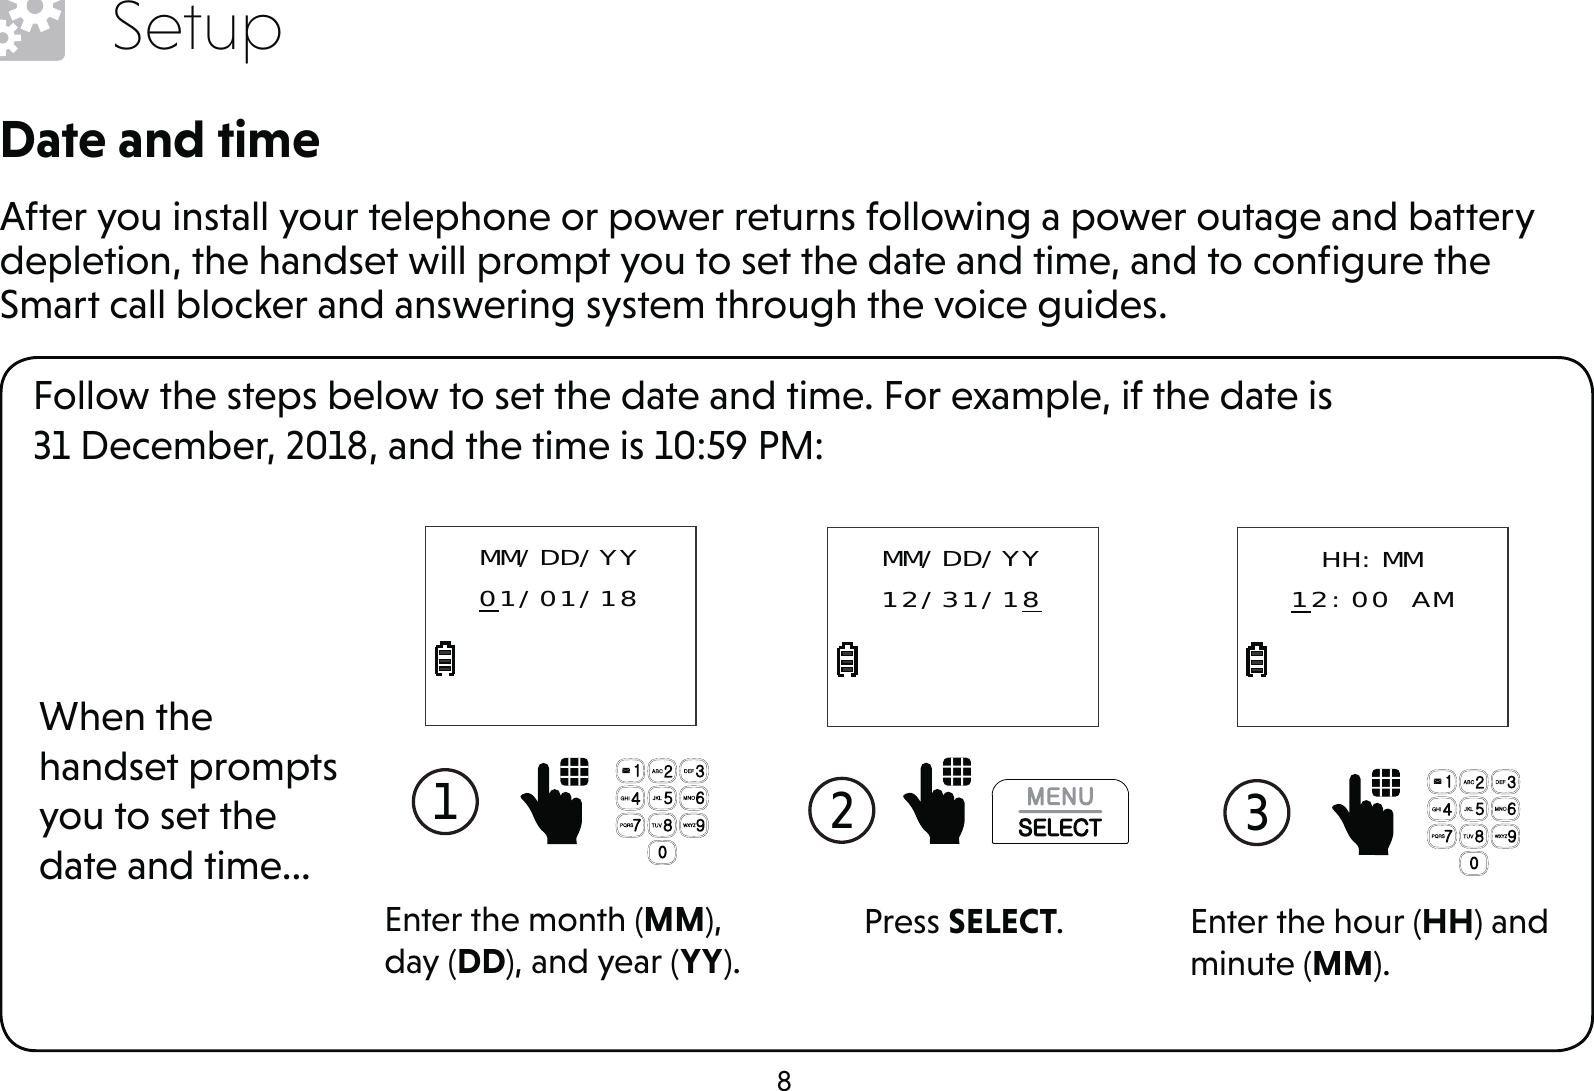 8SetupDate and timeAfter you install your telephone or power returns following a power outage and battery depletion, the handset will prompt you to set the date and time, and to conﬁgure the Smart call blocker and answering system through the voice guides.Follow the steps below to set the date and time. For example, if the date is  31 December, 2018, and the time is 10:59 PM:When the handset prompts you to set the date and time...1  Enter the month (MM), day (DD), and year (YY).MM/DD/YY01/01/182  Press SELECT.MM/DD/YY12/31/183  Enter the hour (HH) and minute (MM).HH:MM12:00 AM